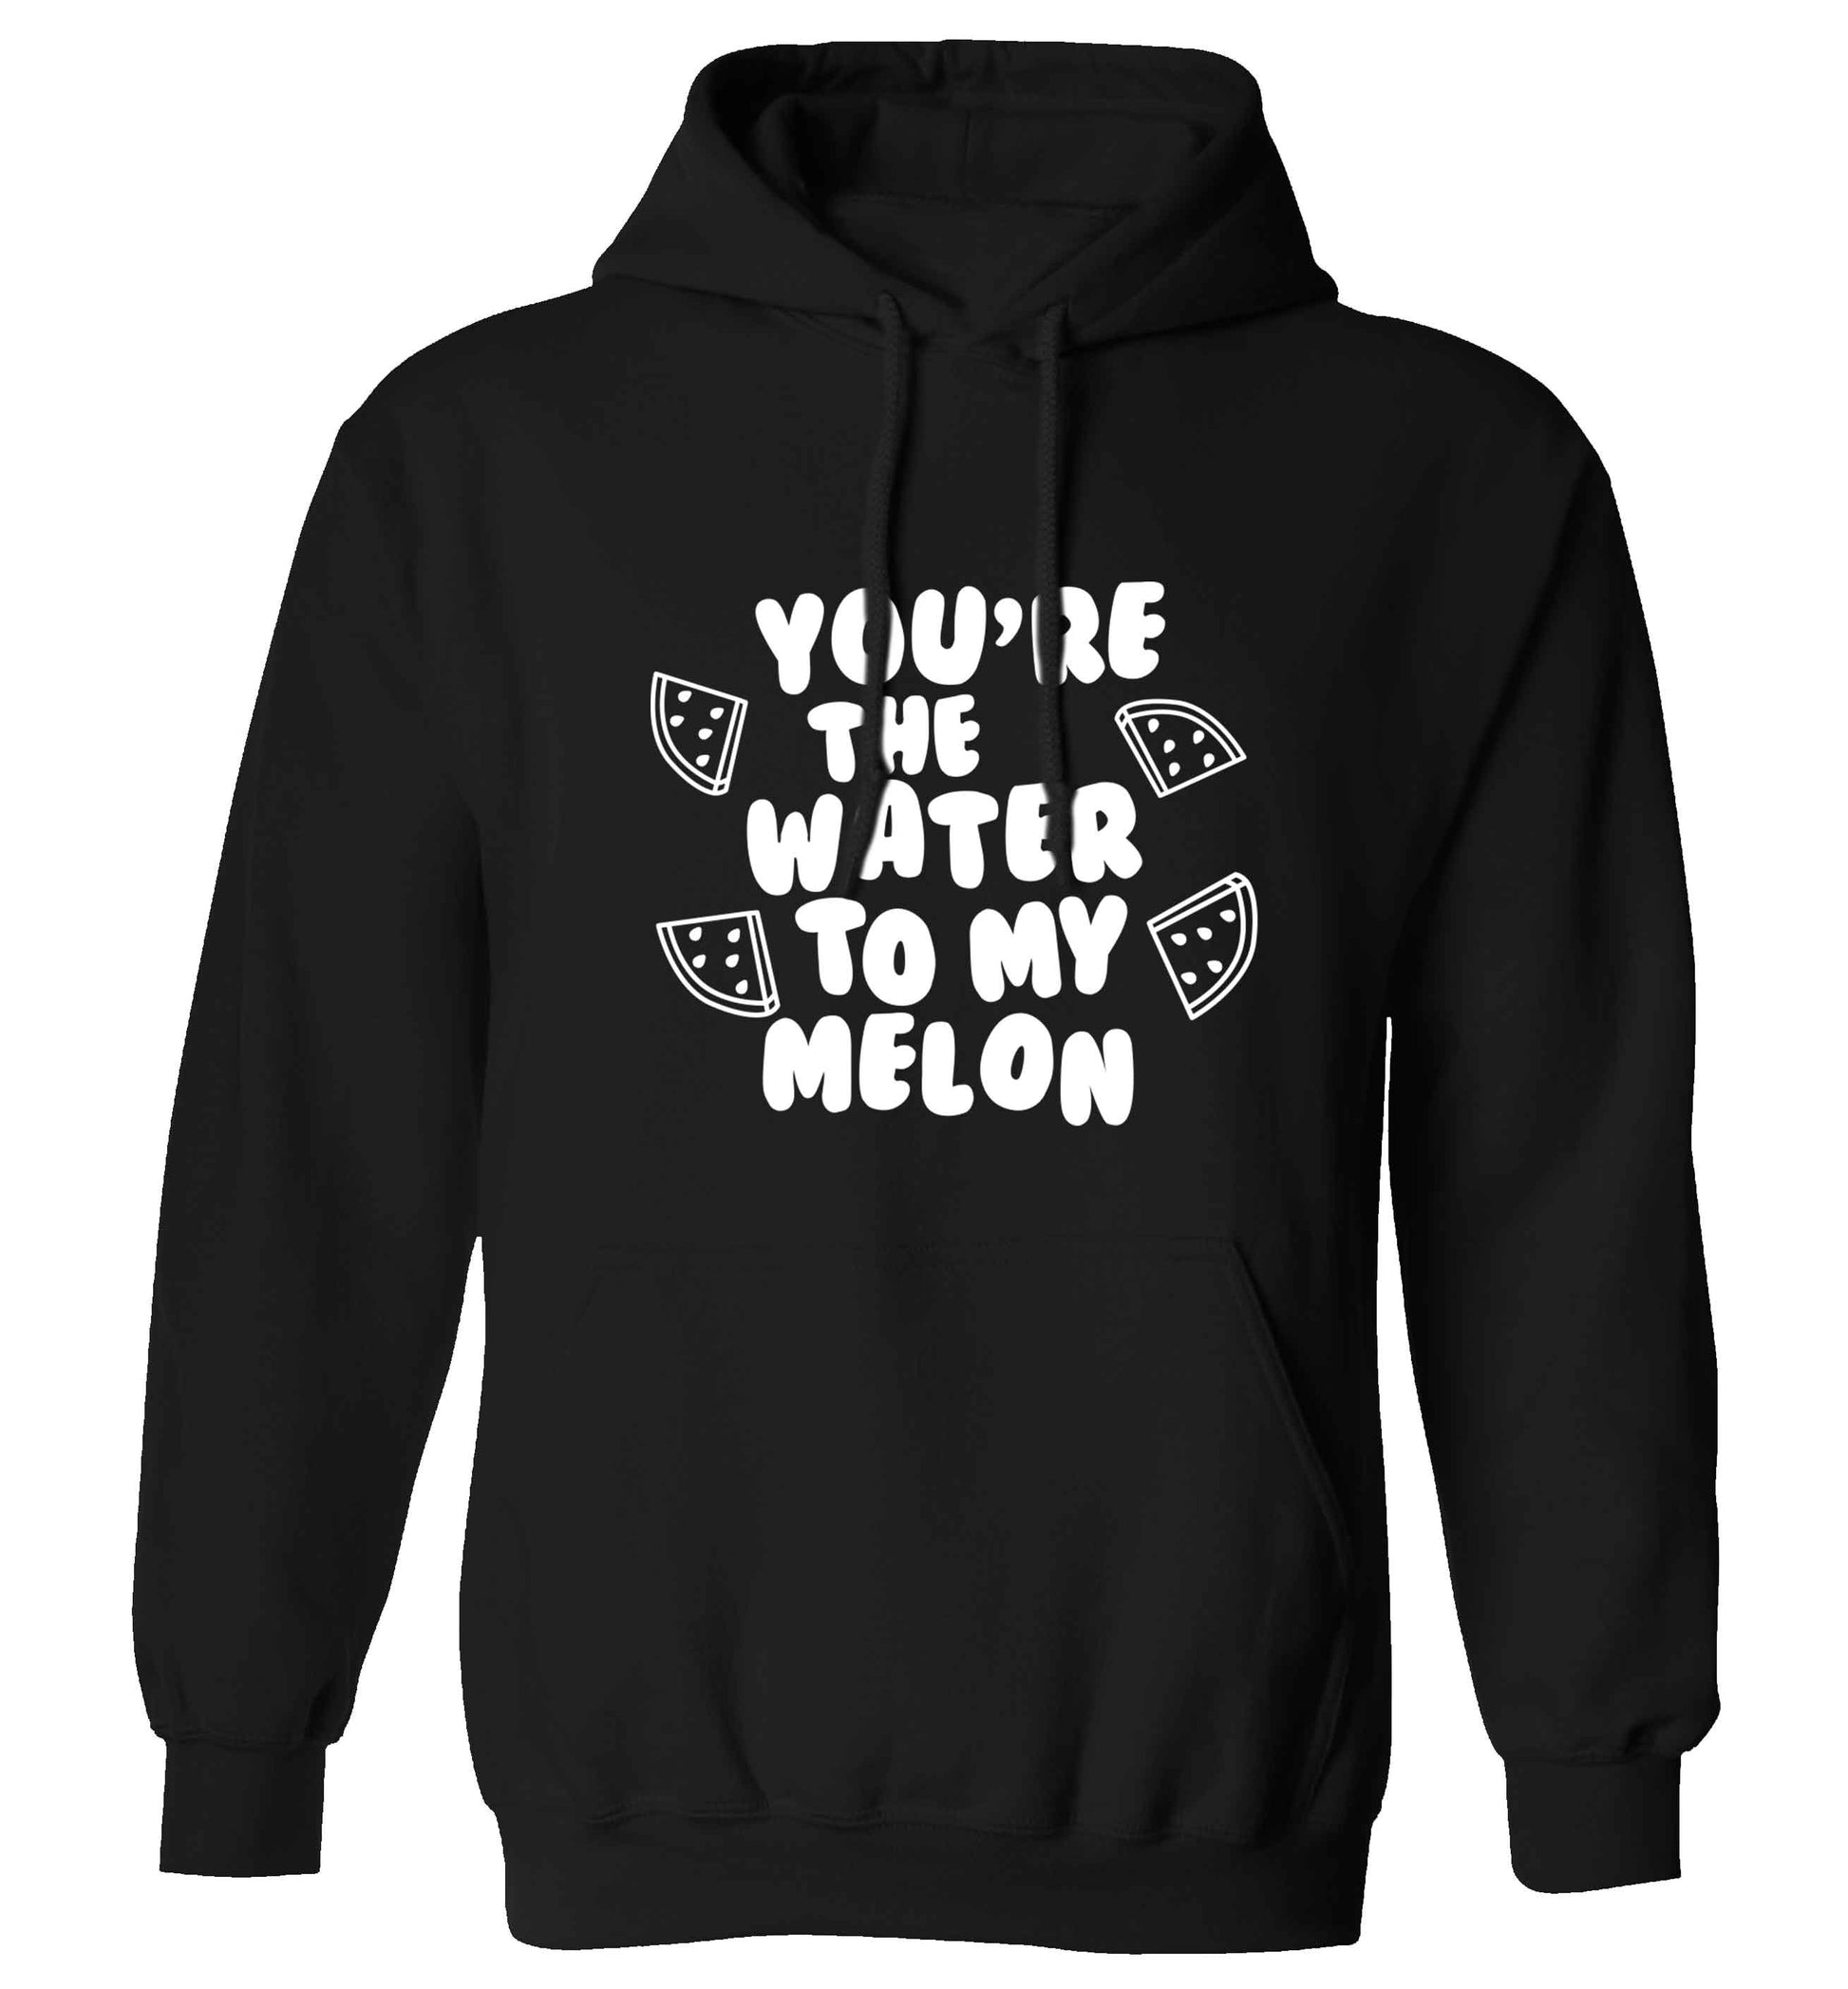 You're the water to my melon adults unisex black hoodie 2XL